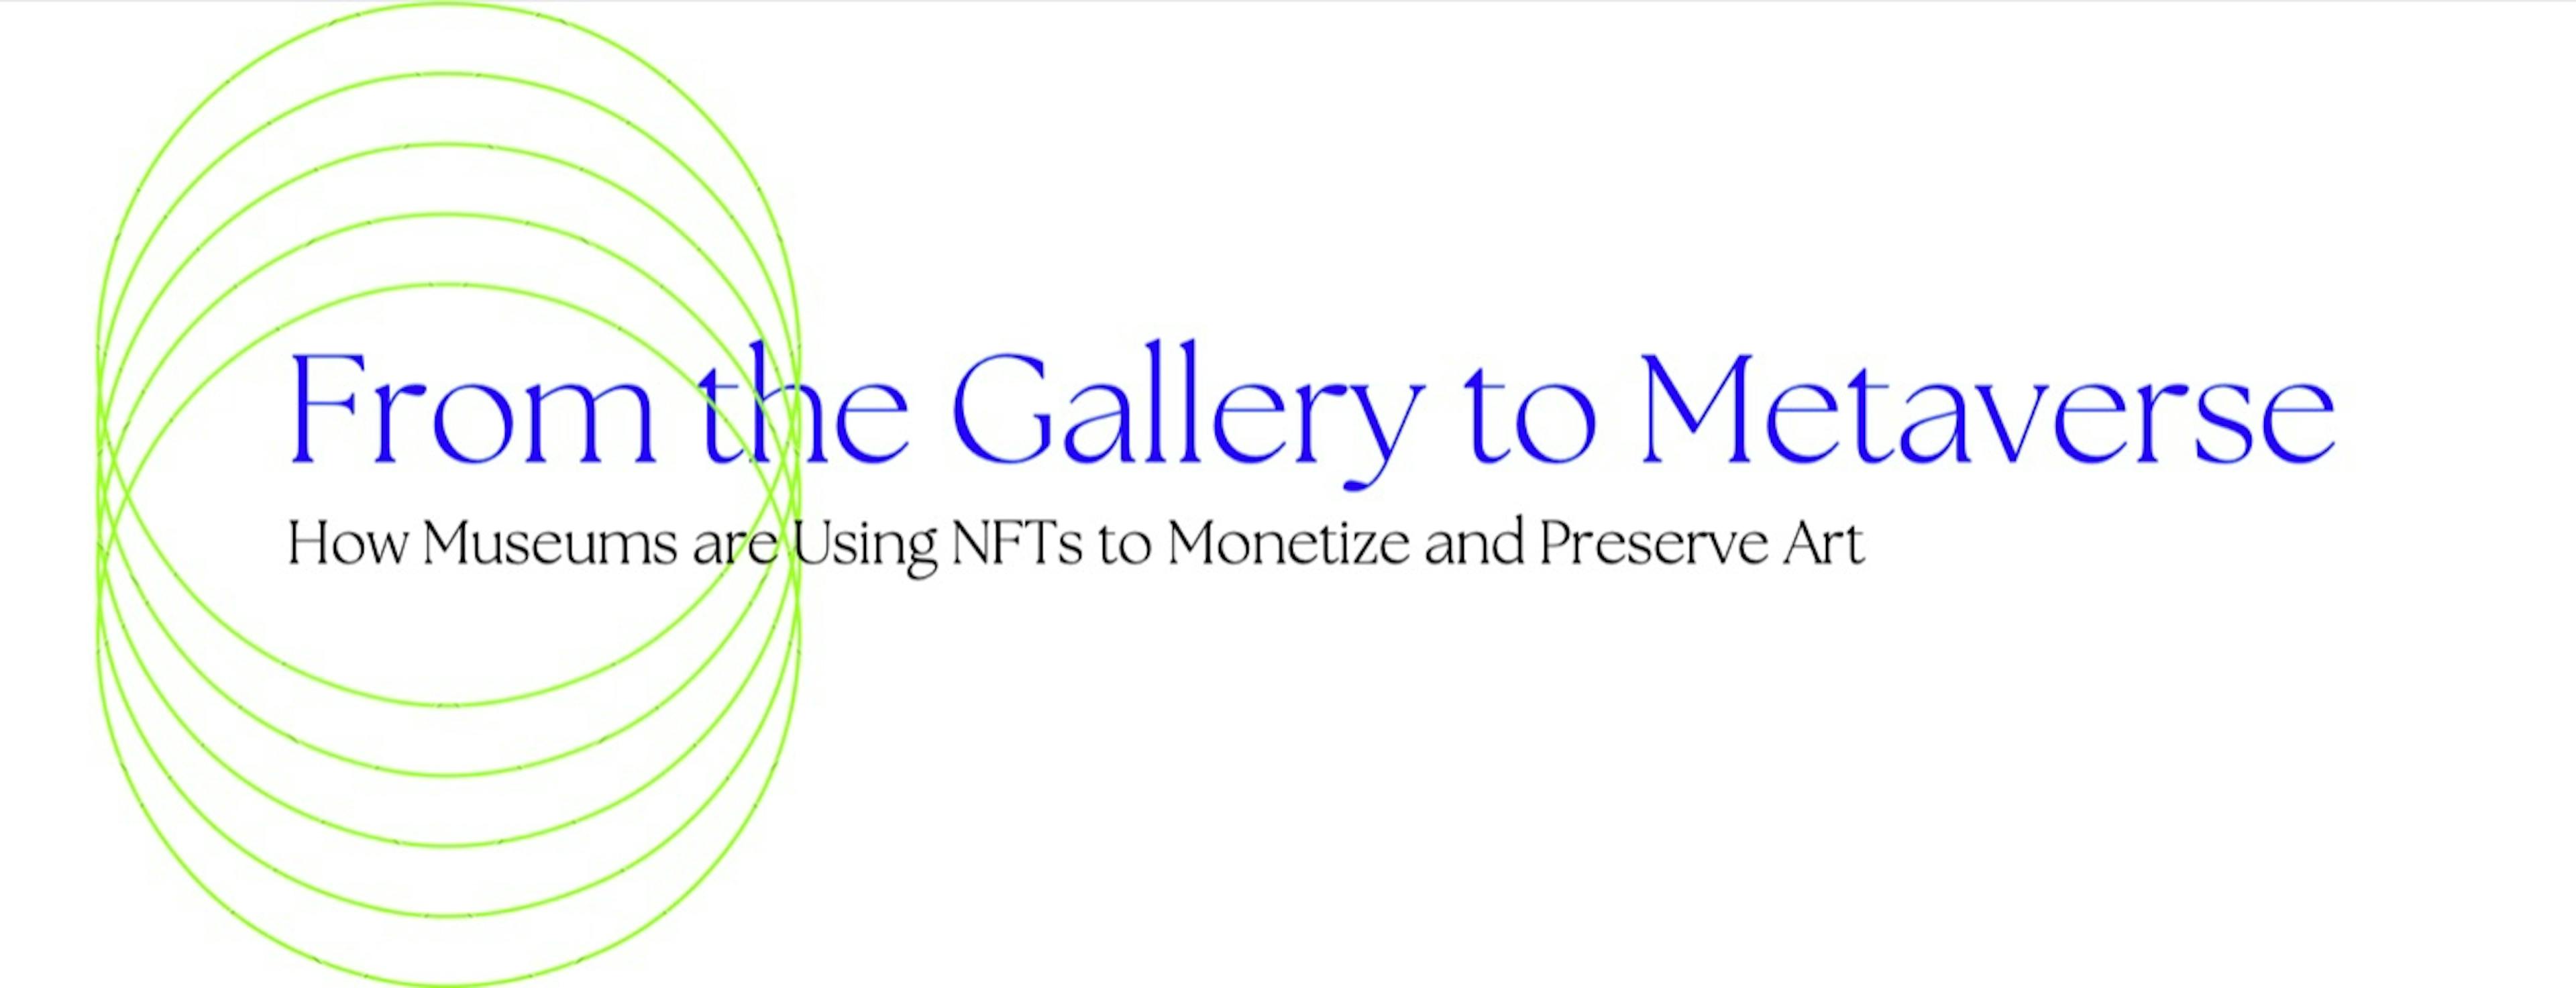 /how-museums-are-using-nfts-to-monetize-and-preserve-art feature image